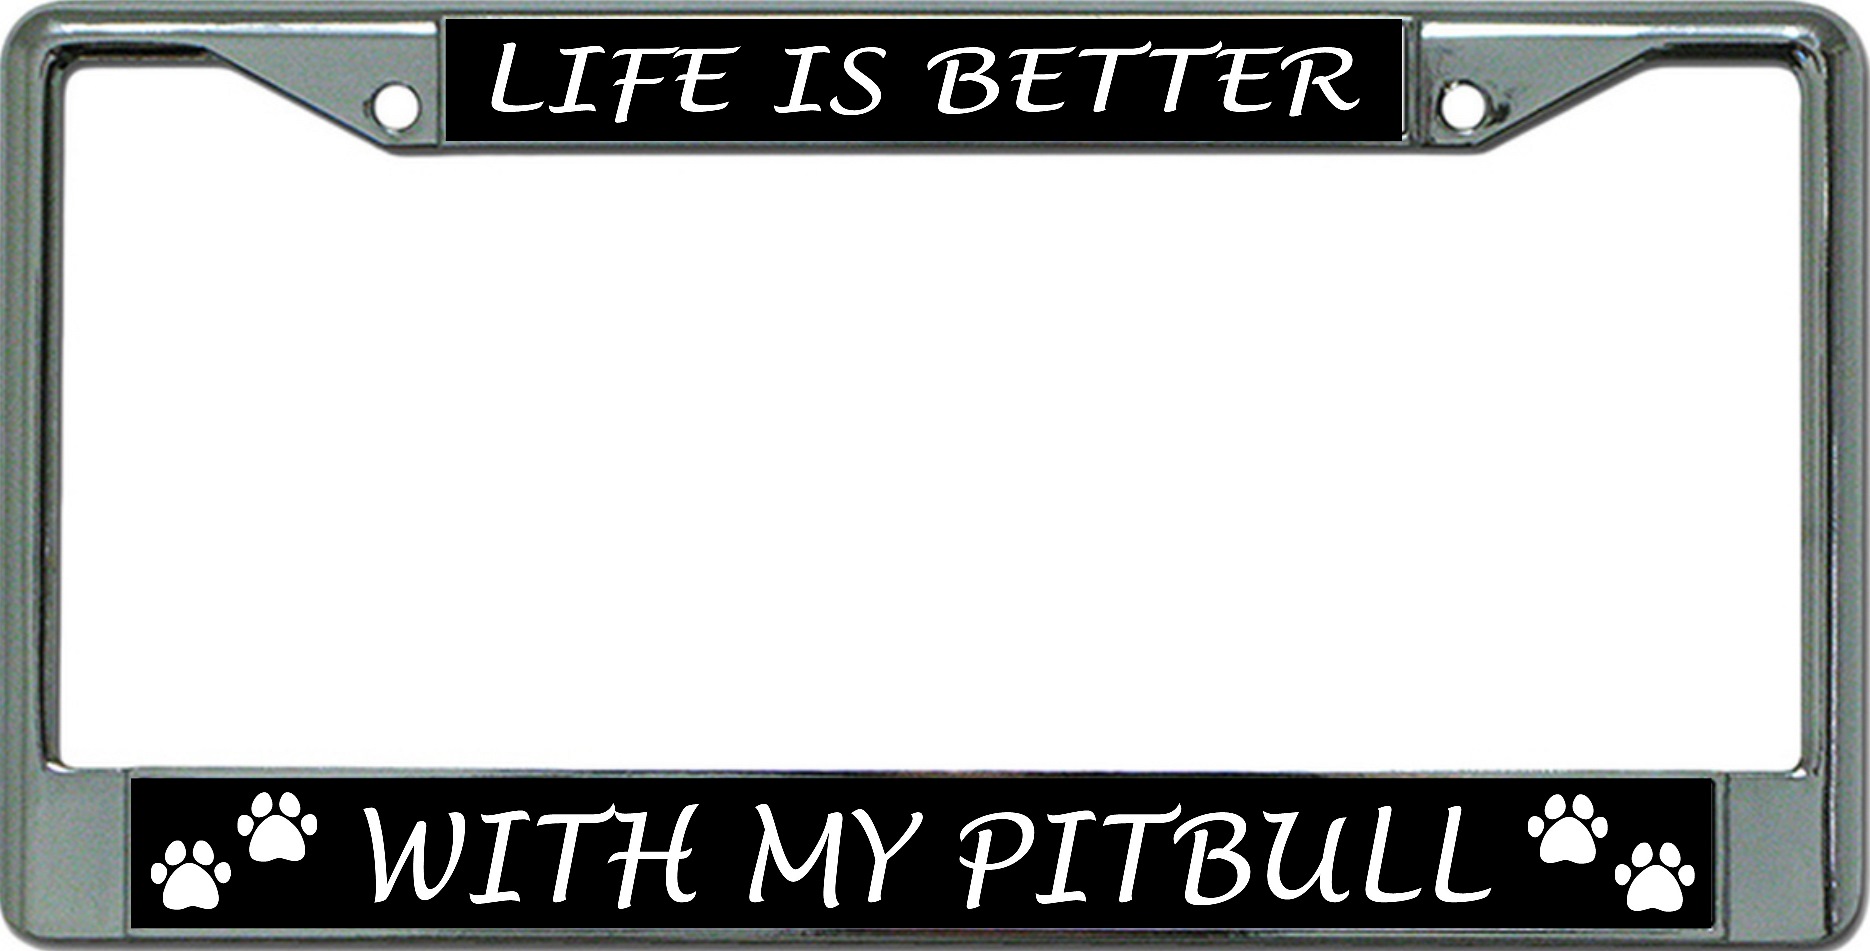 Life Is Better With My Pit Bull Chrome License Plate FRAME